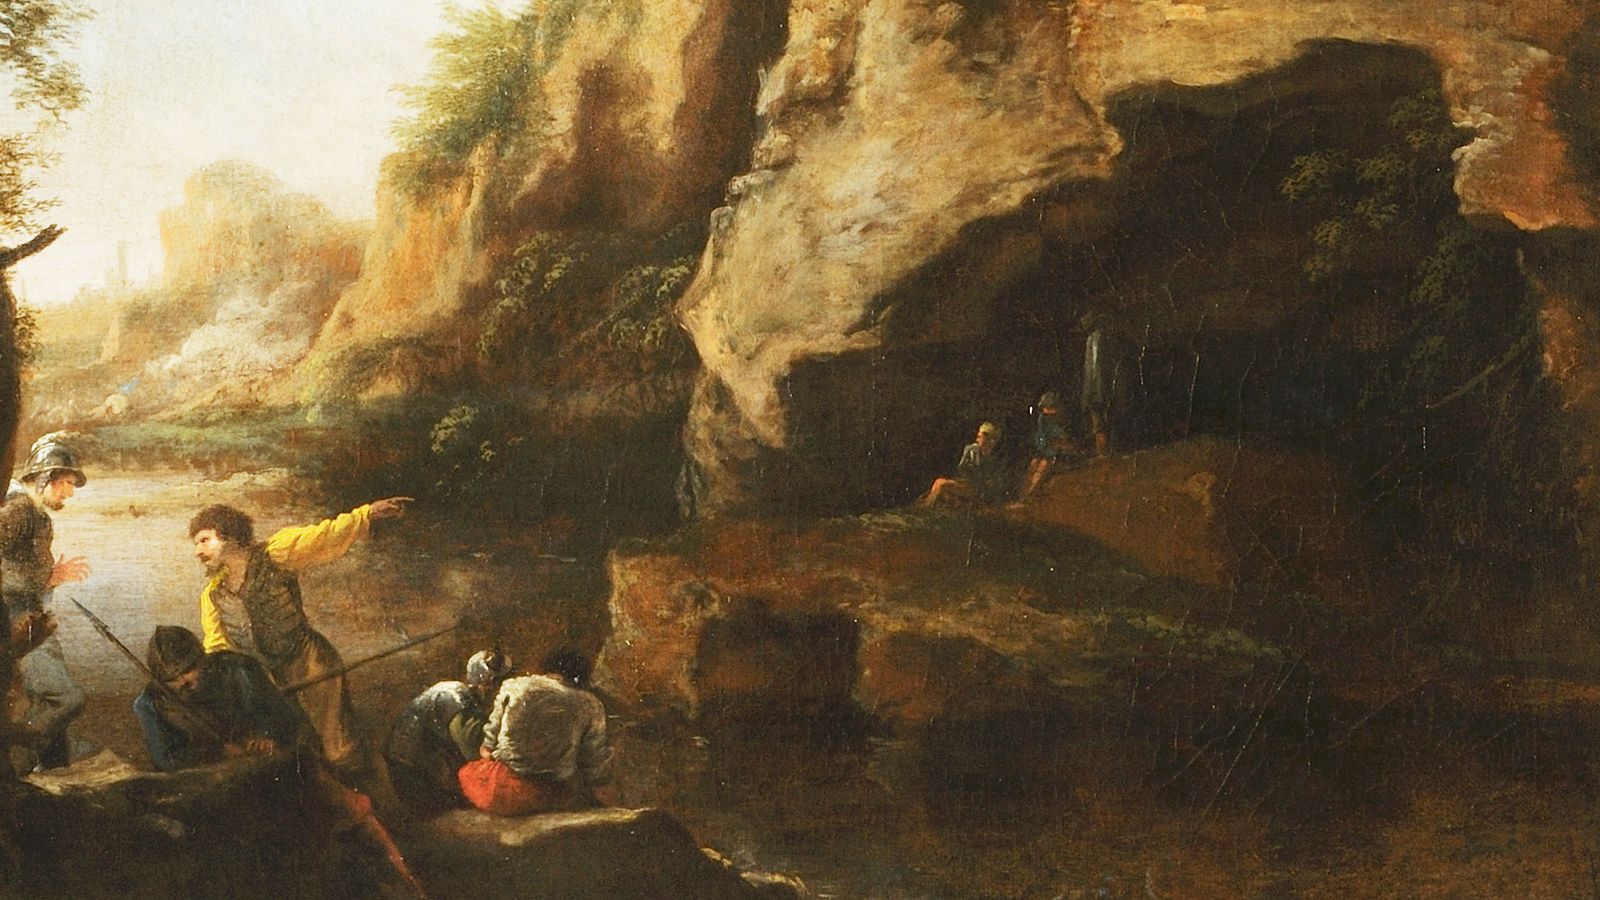 Salvator Rosa painting stolen in Oxford raid found in Romania - two other artworks still missing